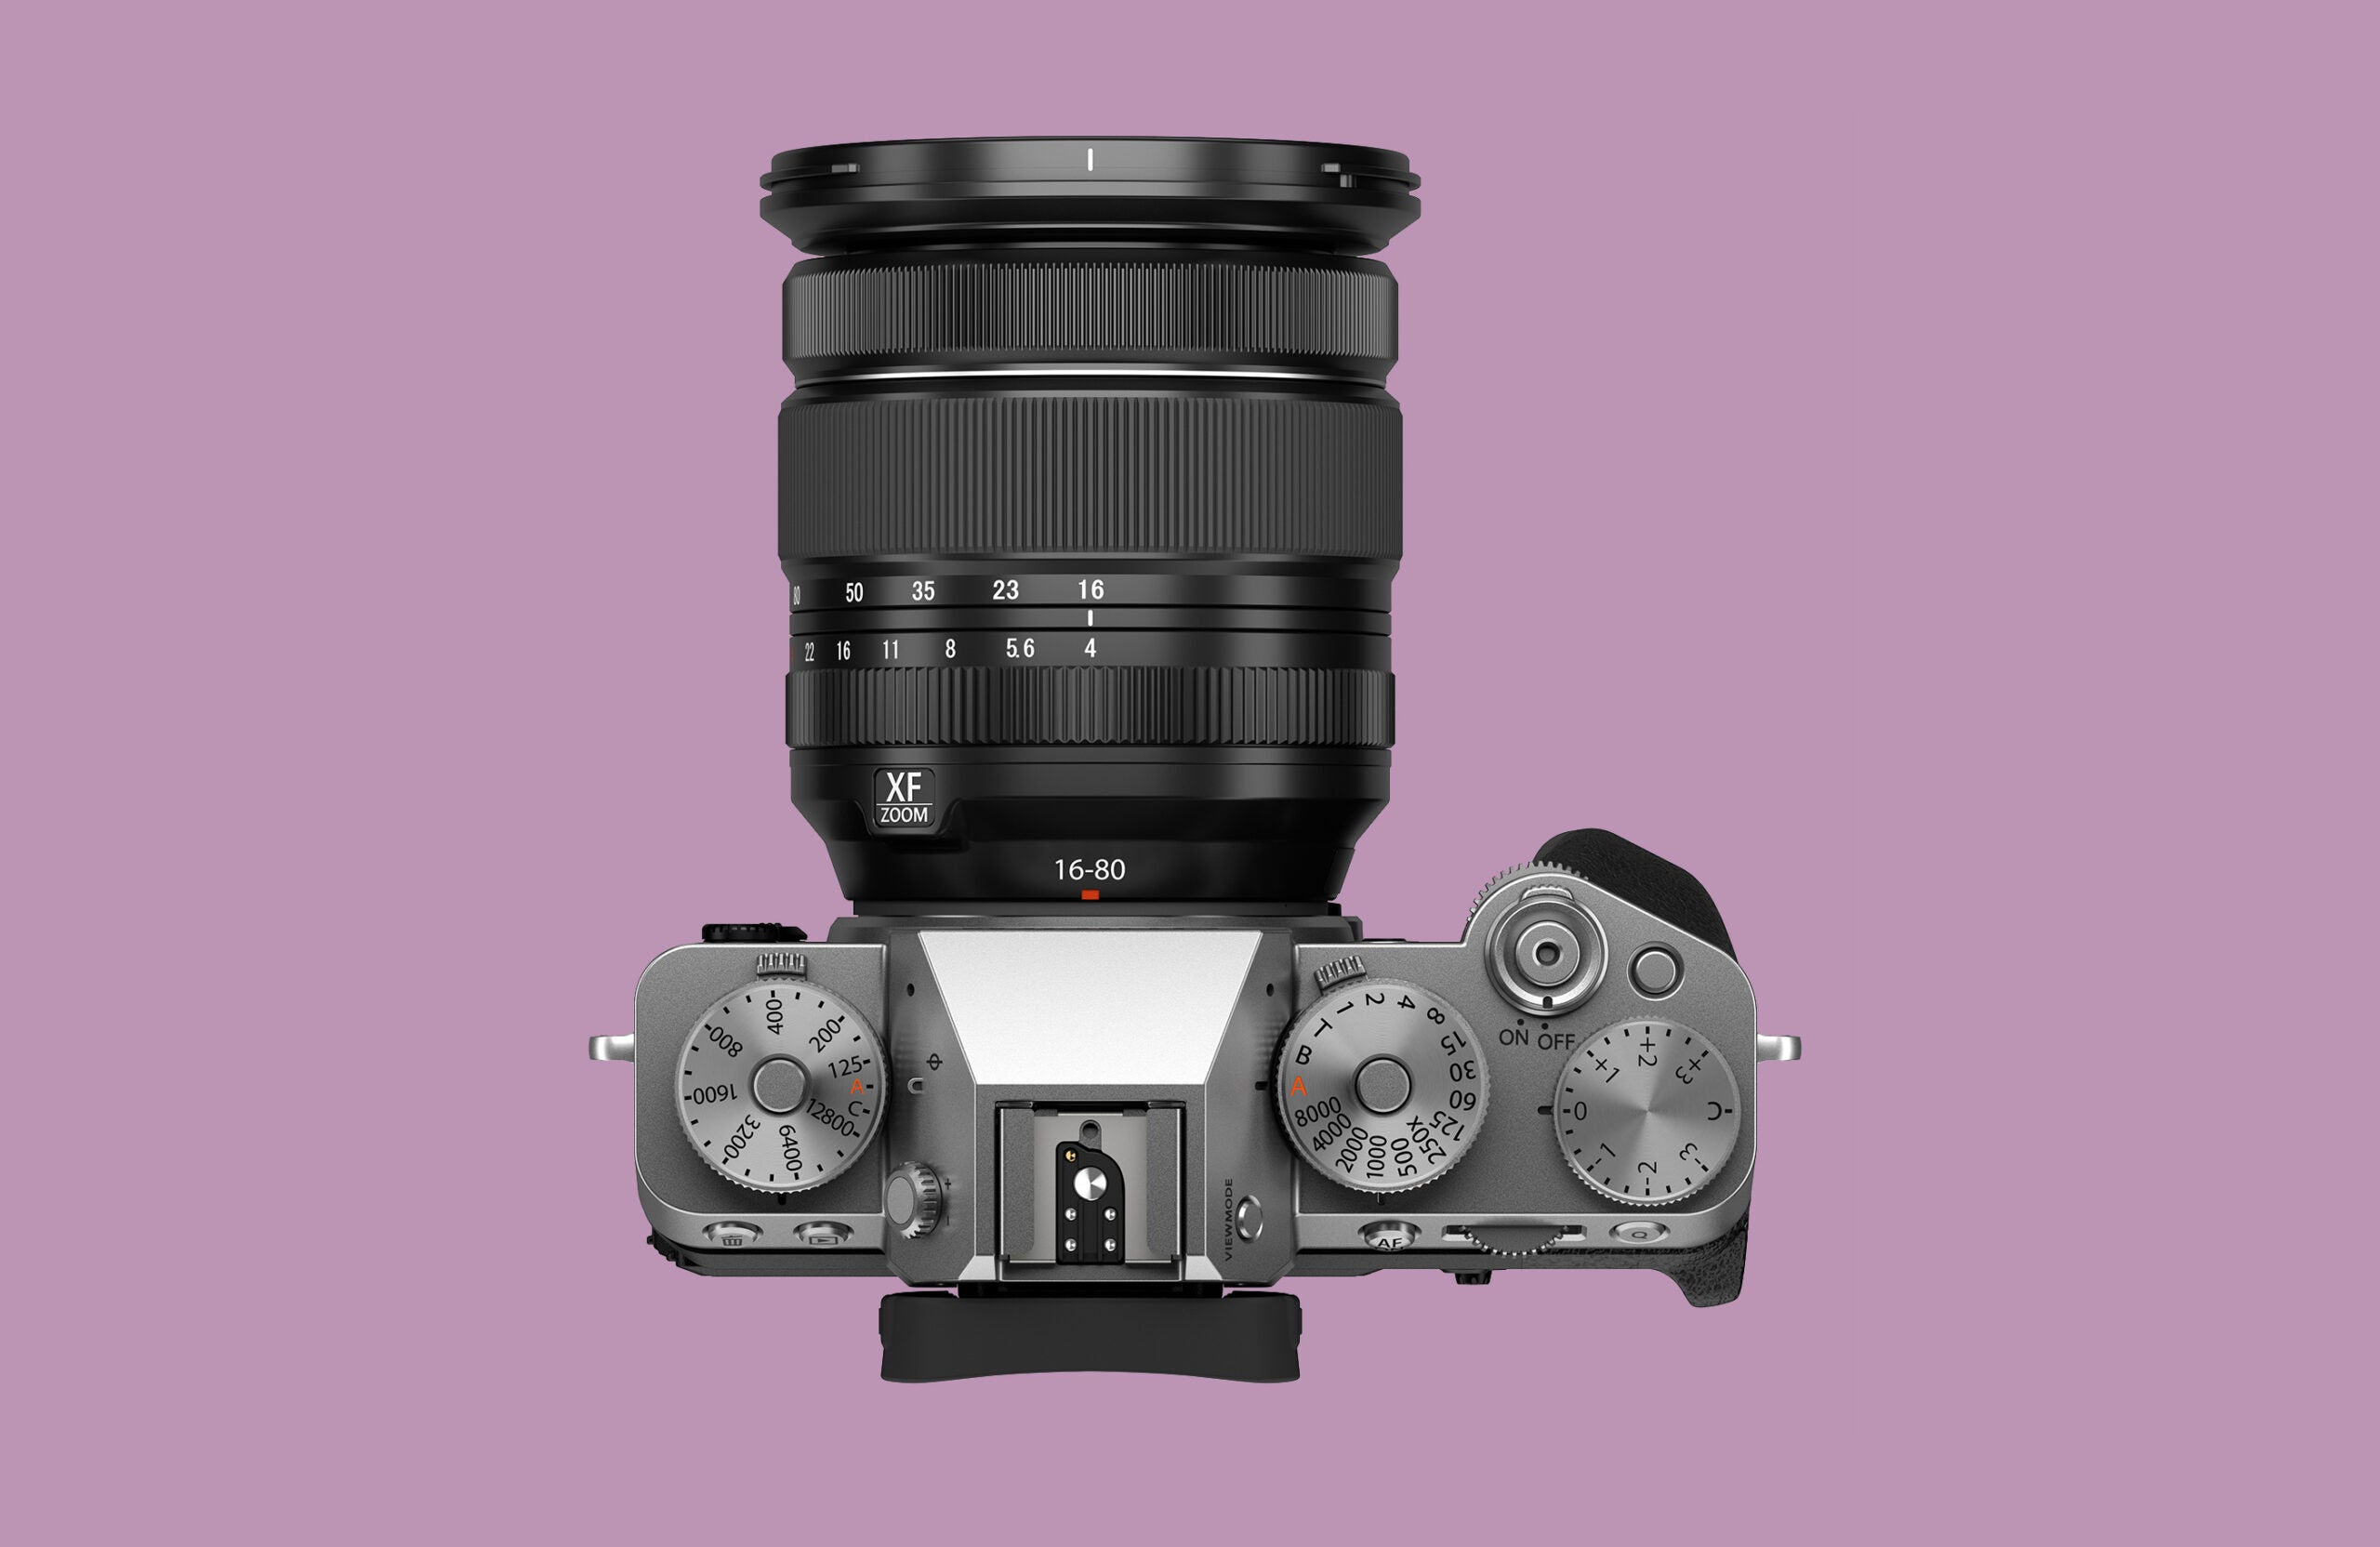 The X-T5 keeps much of the same design as its predecessor.